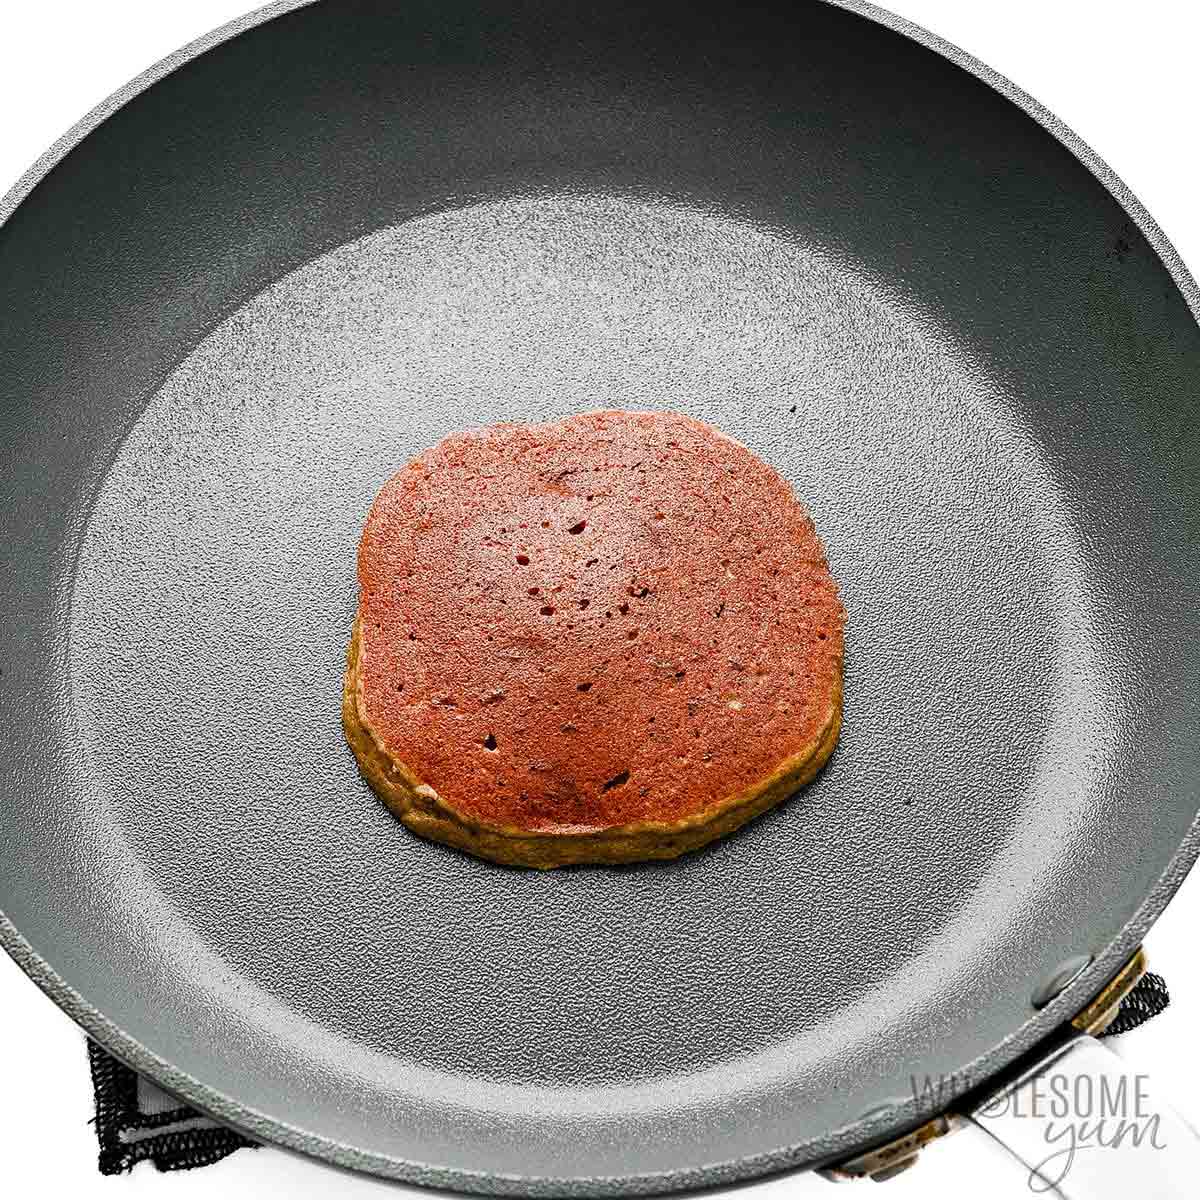 Pancake being cooked in a skillet.